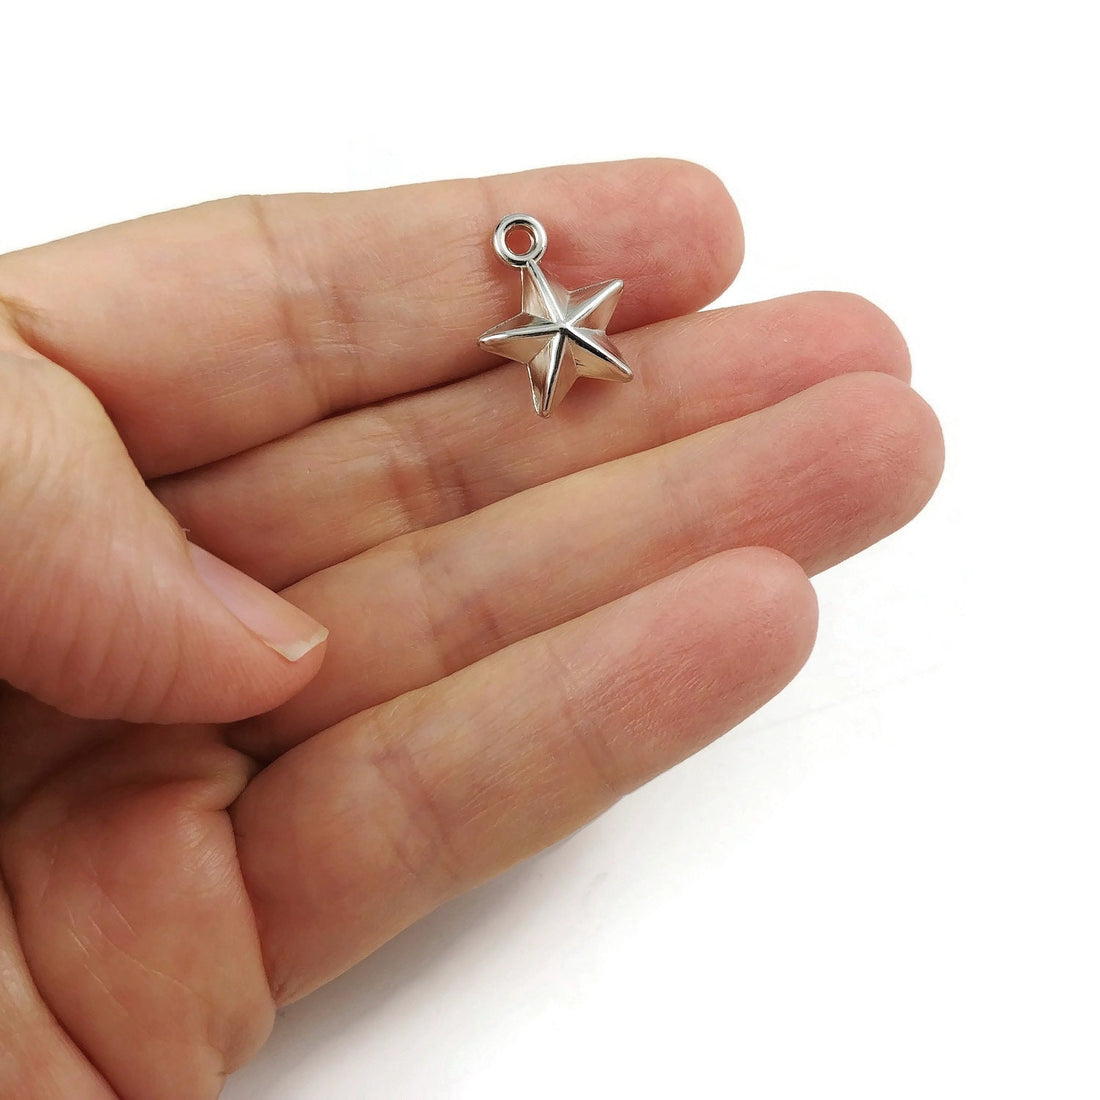 Silver star charms, Acrylic celestial charms, Small star pendants for jewelry making, Earring or bracelet charms